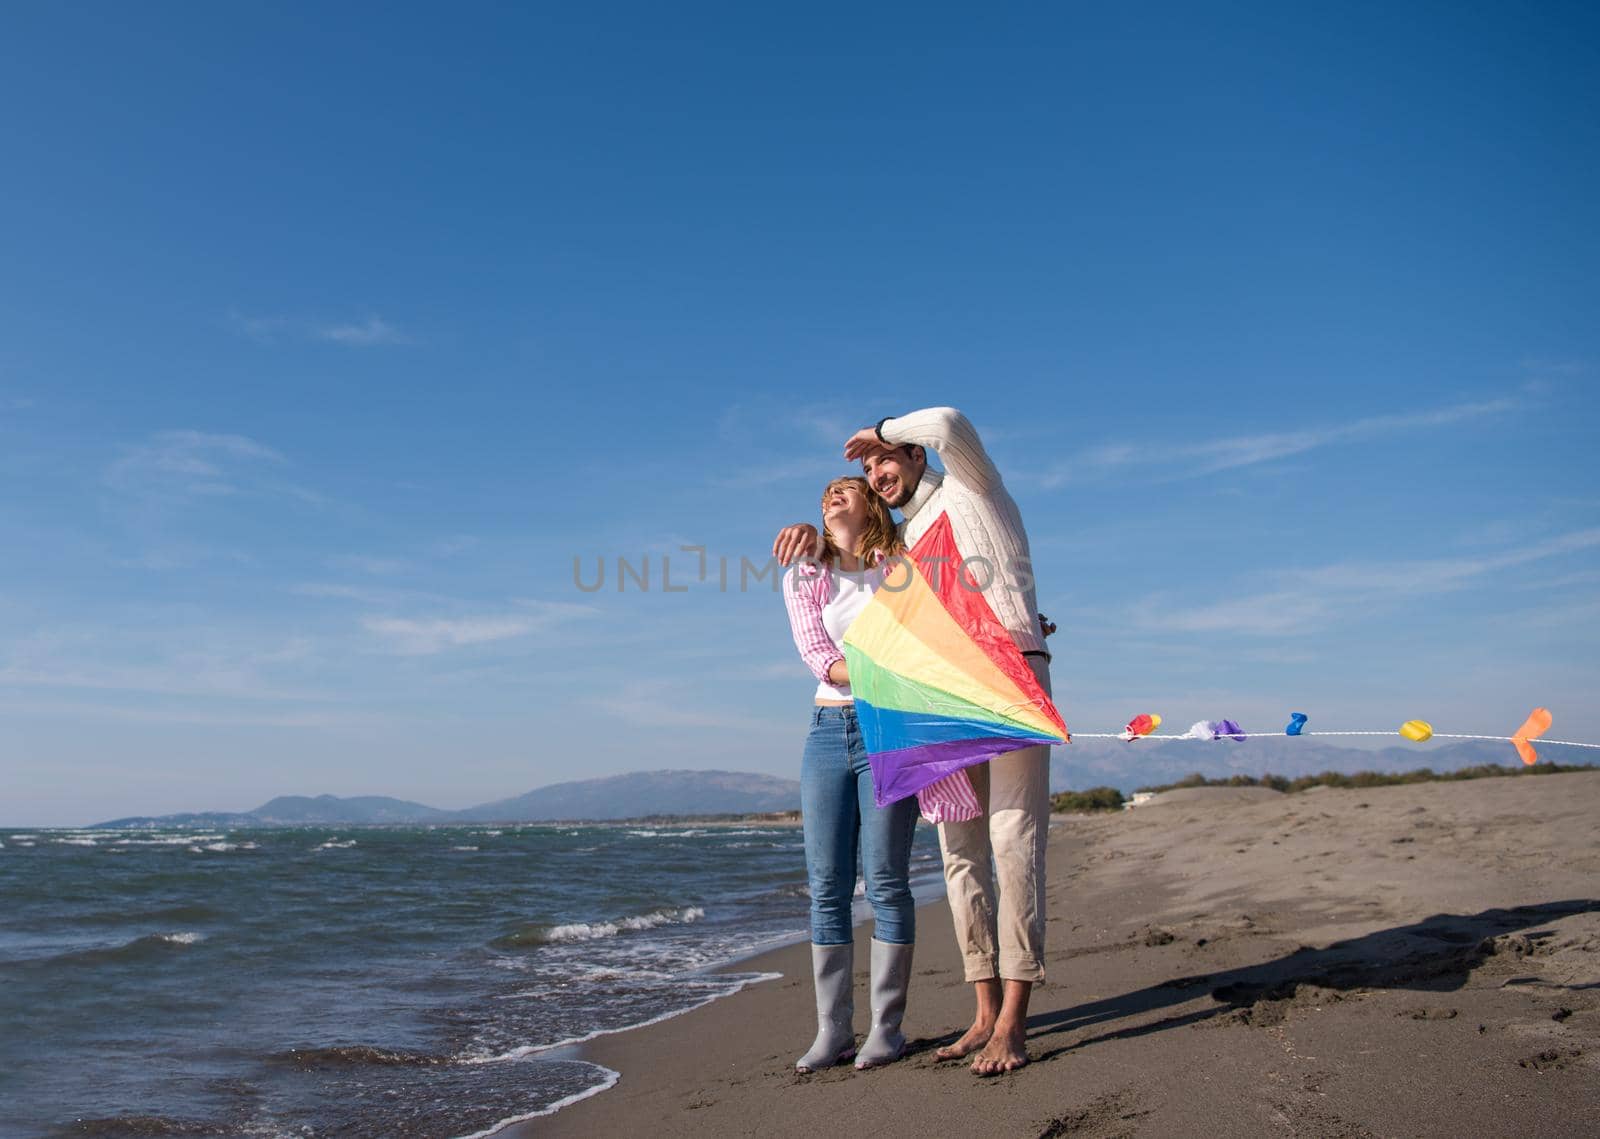 Young Couple having fun and Playing With A Kite On The Beach at autumn day